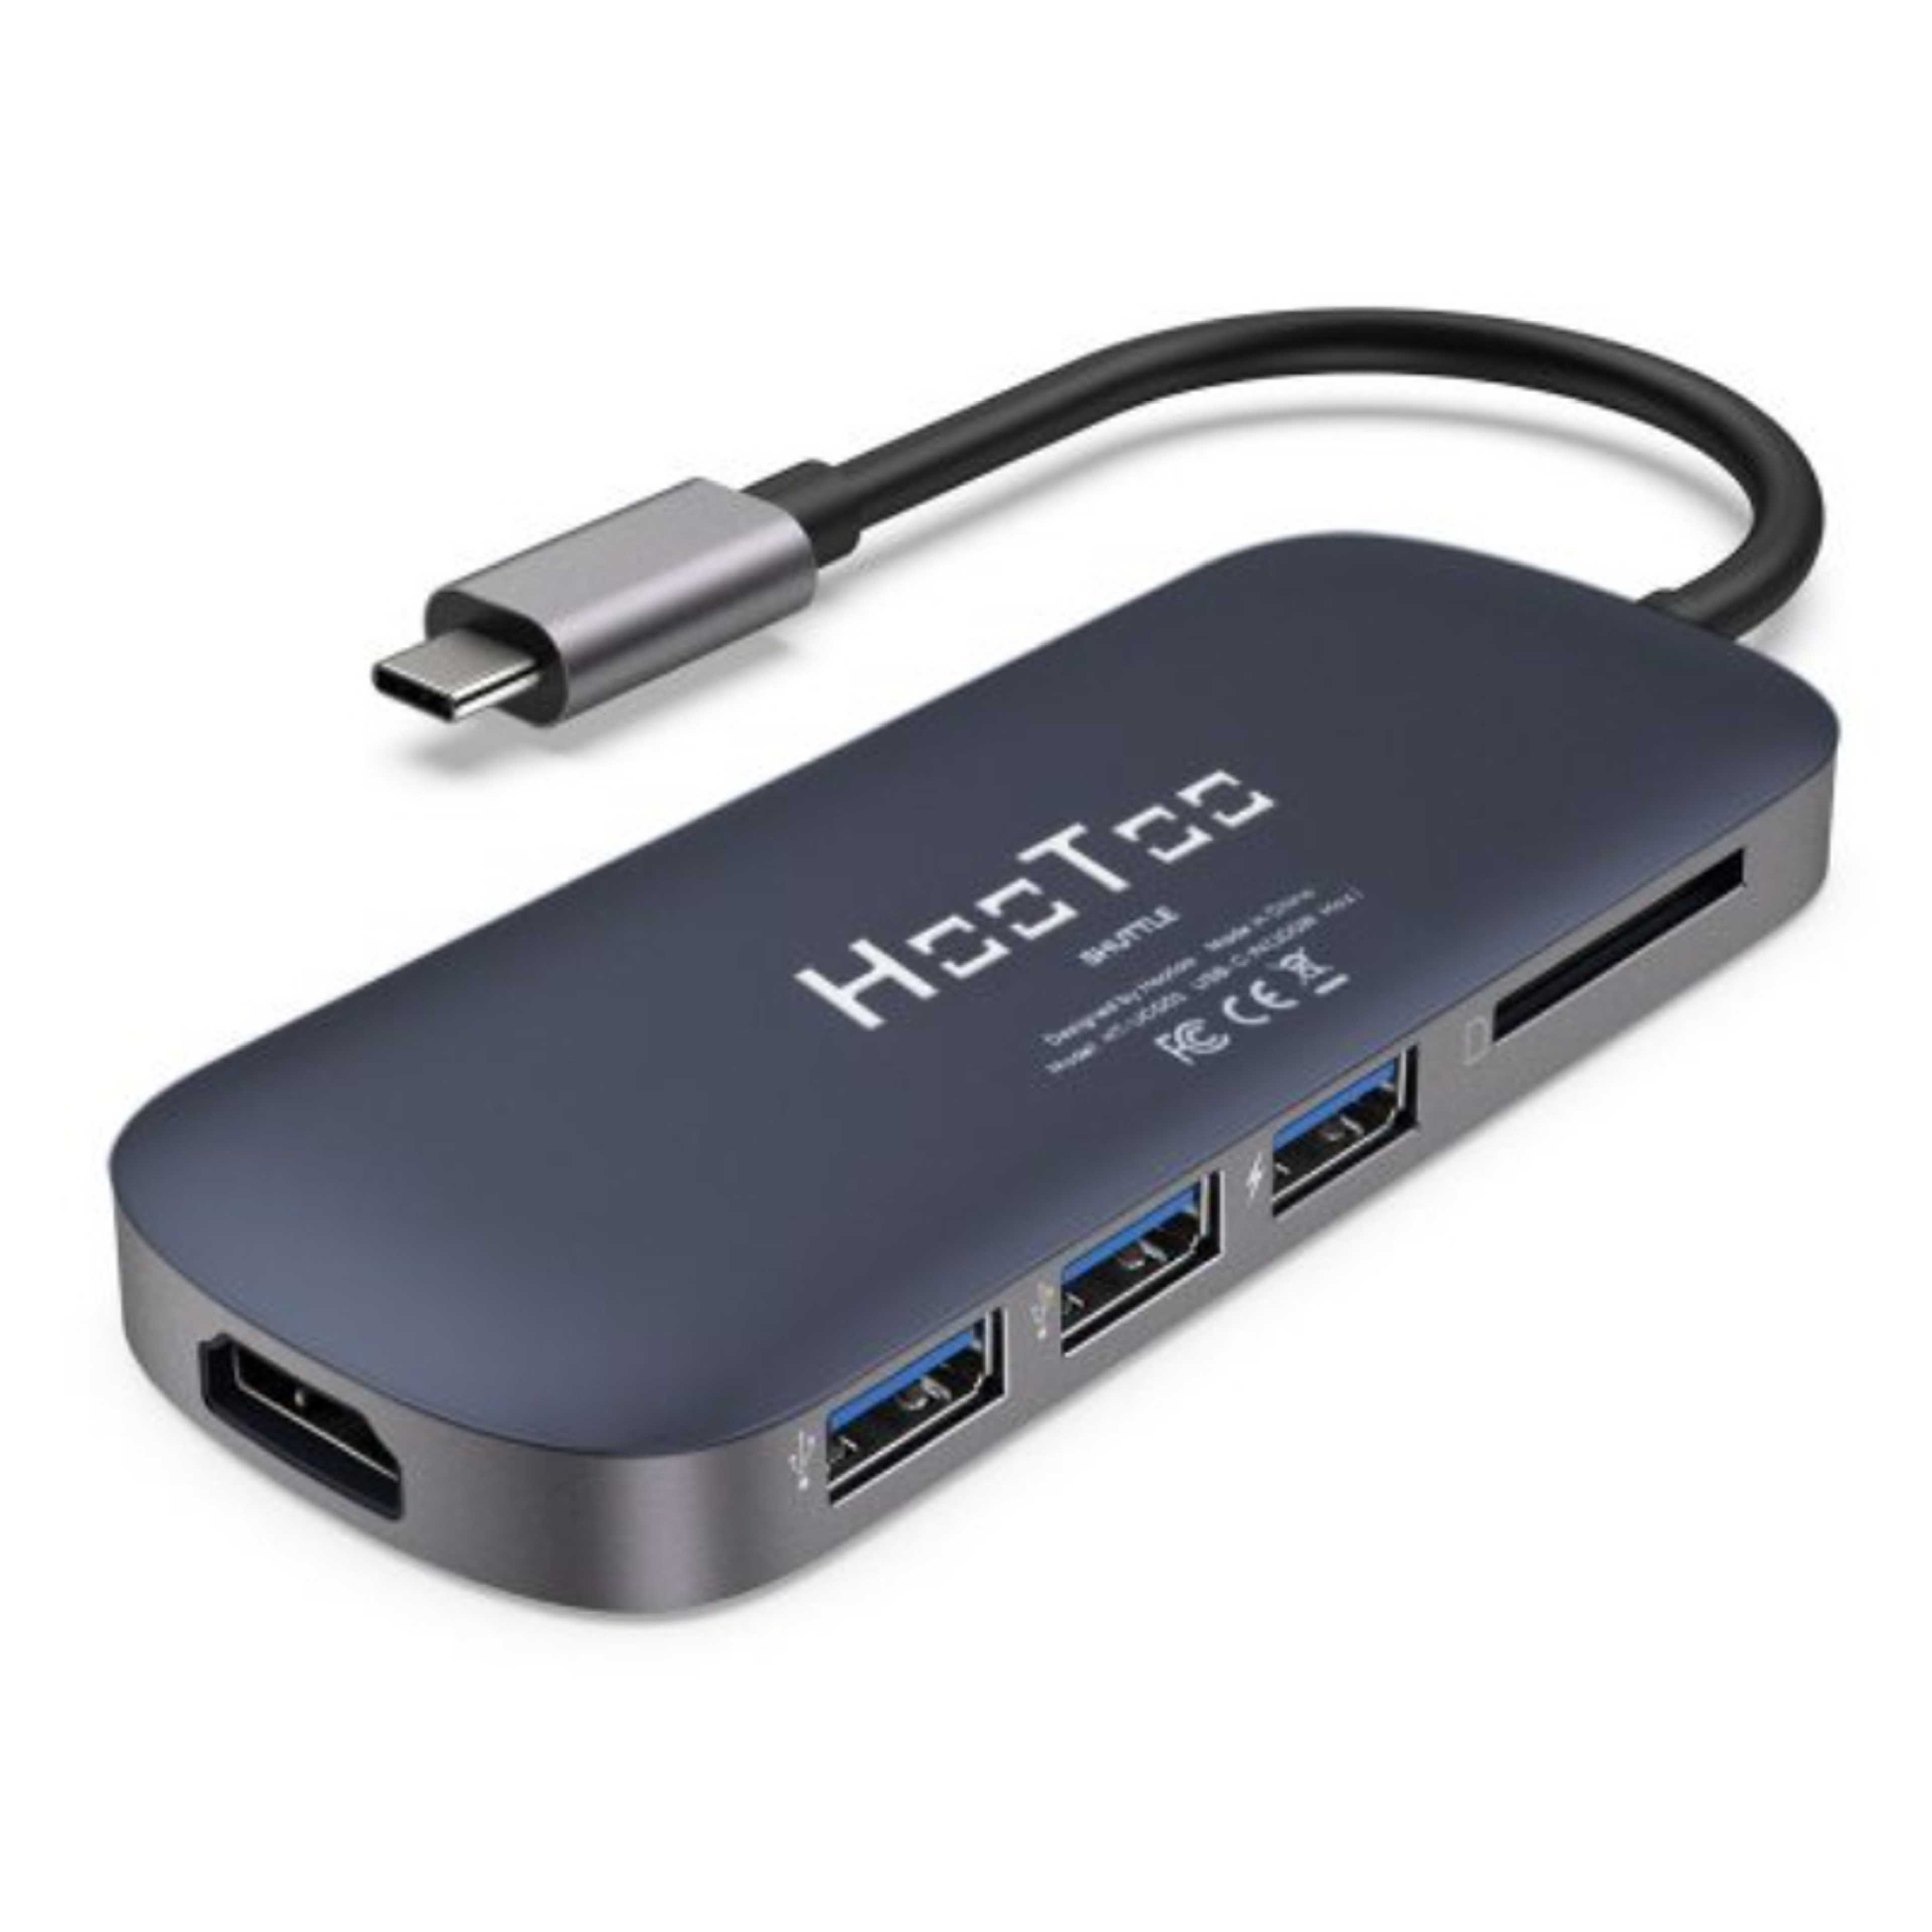 HooToo Shuttle USB 3.1 Type-C Hub with Power Delivery for Charging, HDMI Output, SD Card Reader Apple MacBook-5